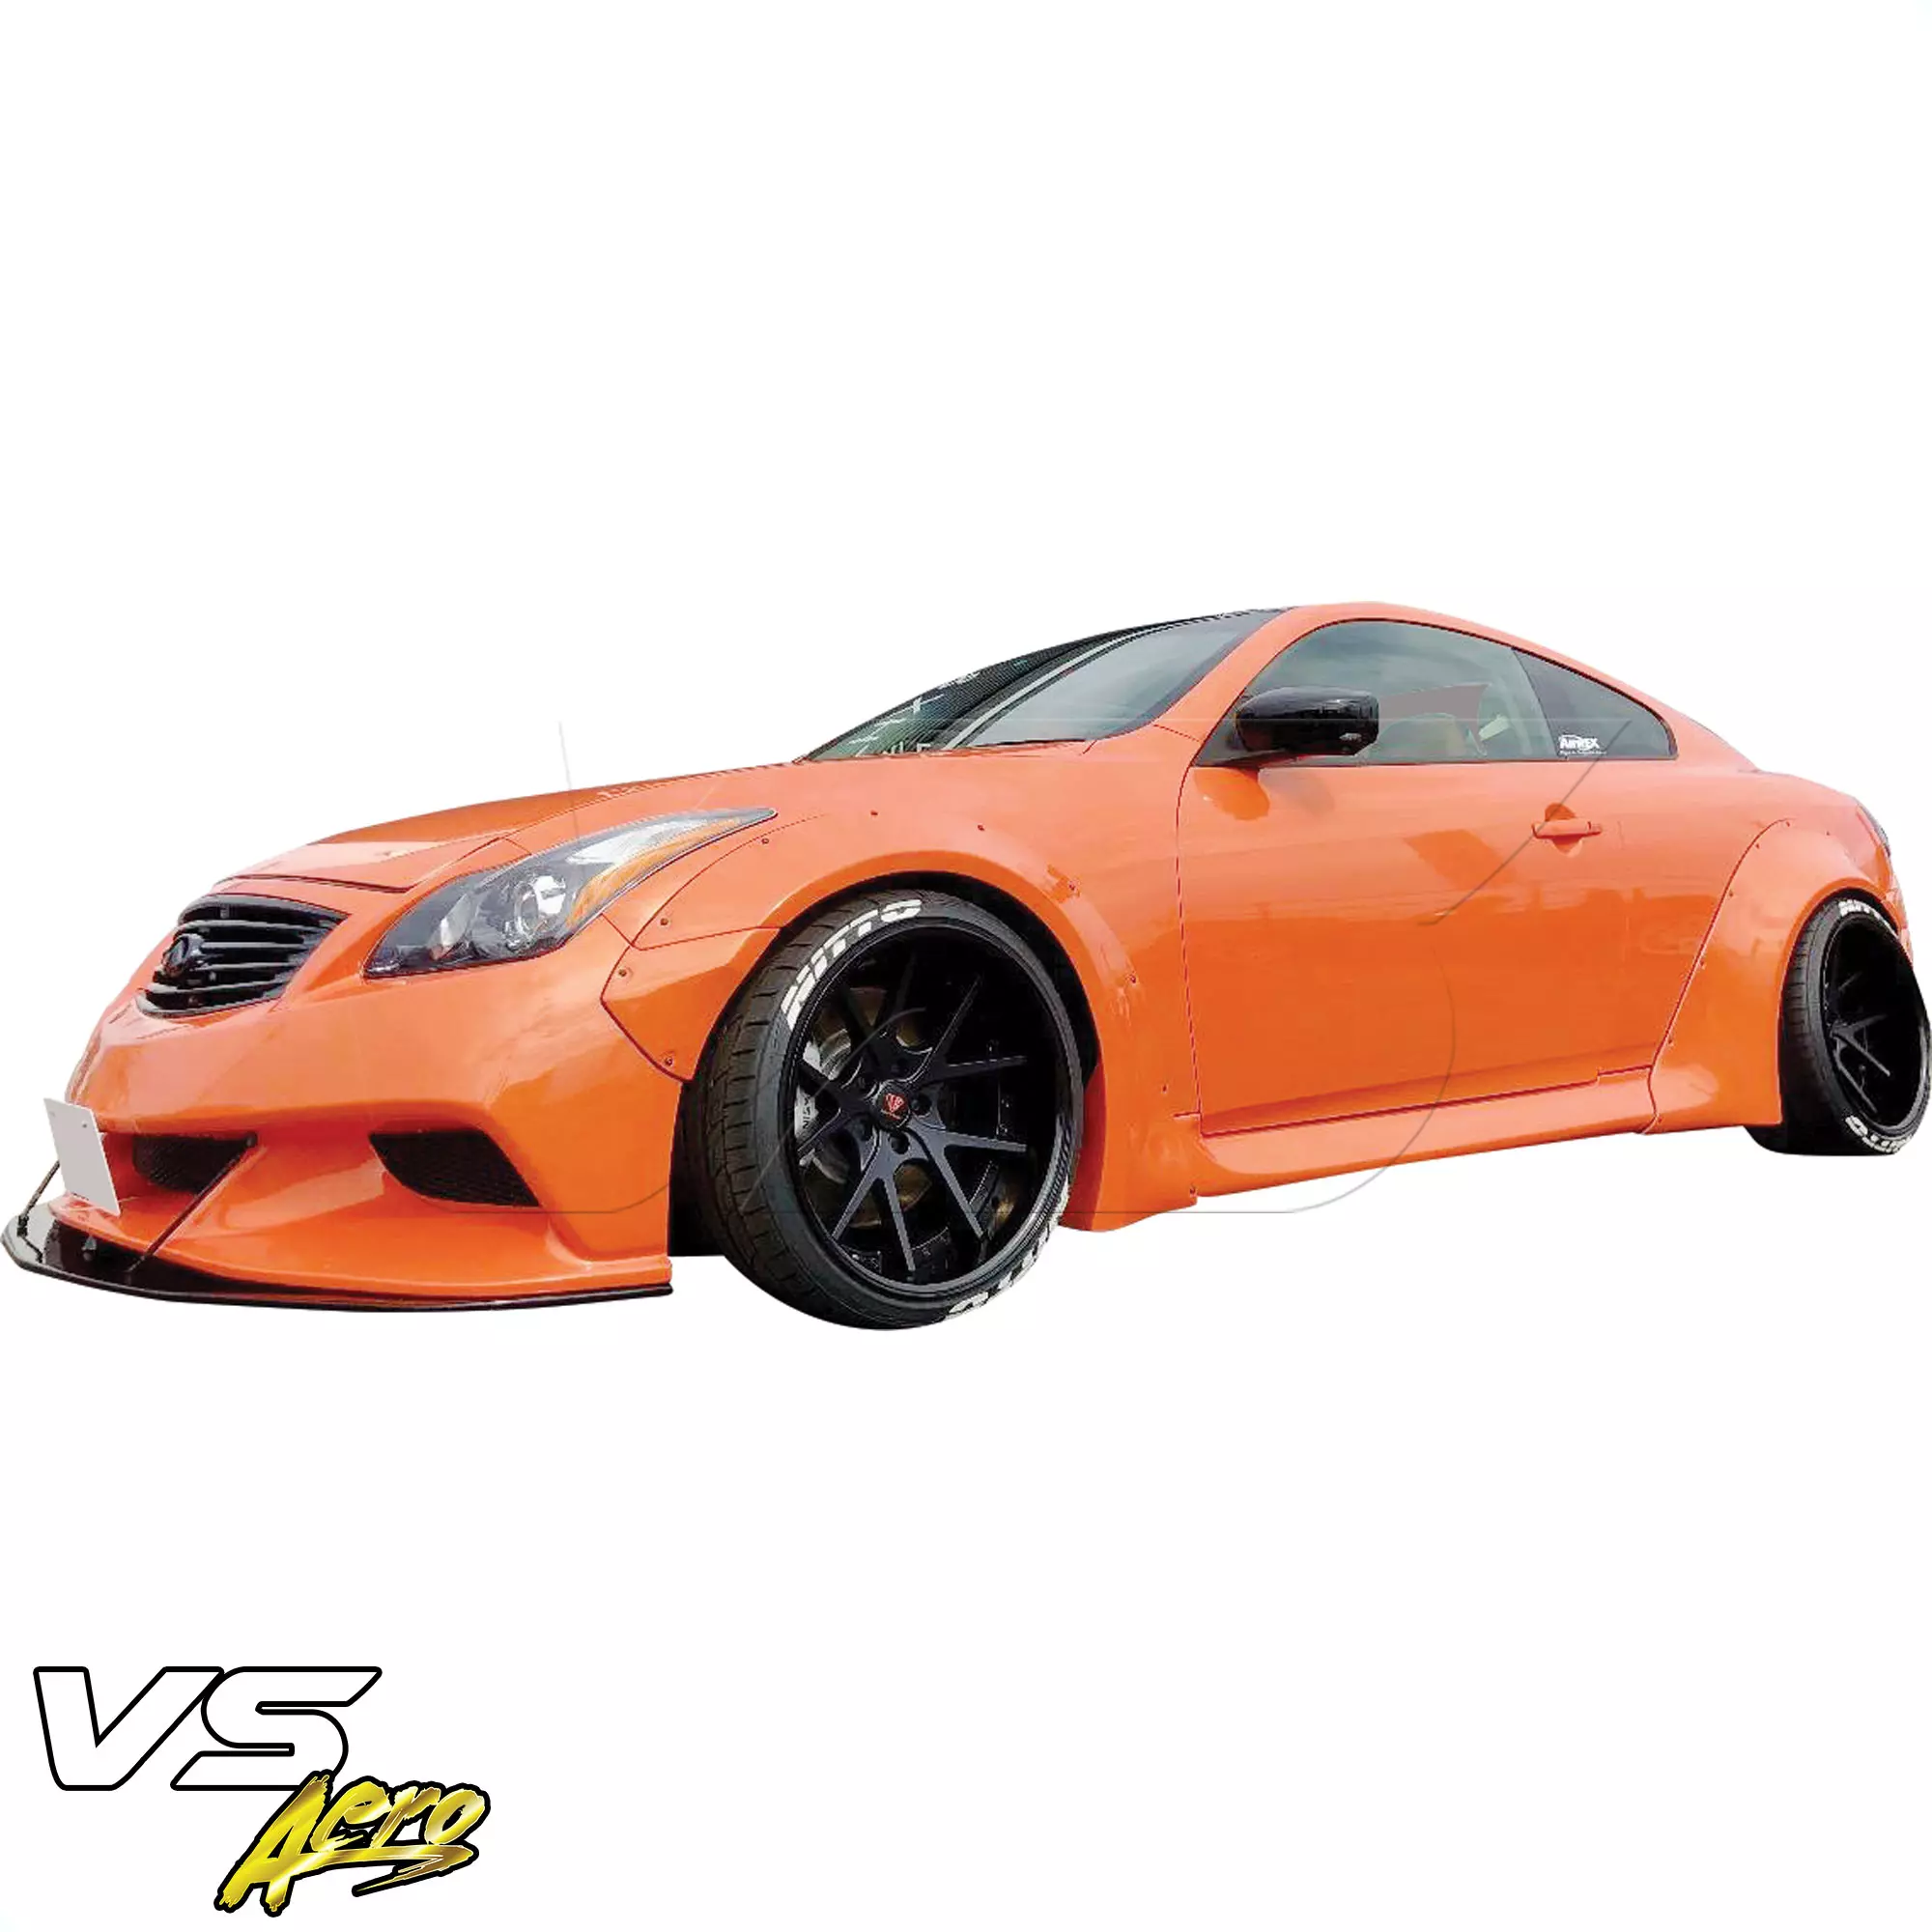 VSaero FRP LBPE Wide Body Fender Flares (rear) 4pc > Infiniti G37 Coupe 2008-2015 > 2dr Coupe - Image 12